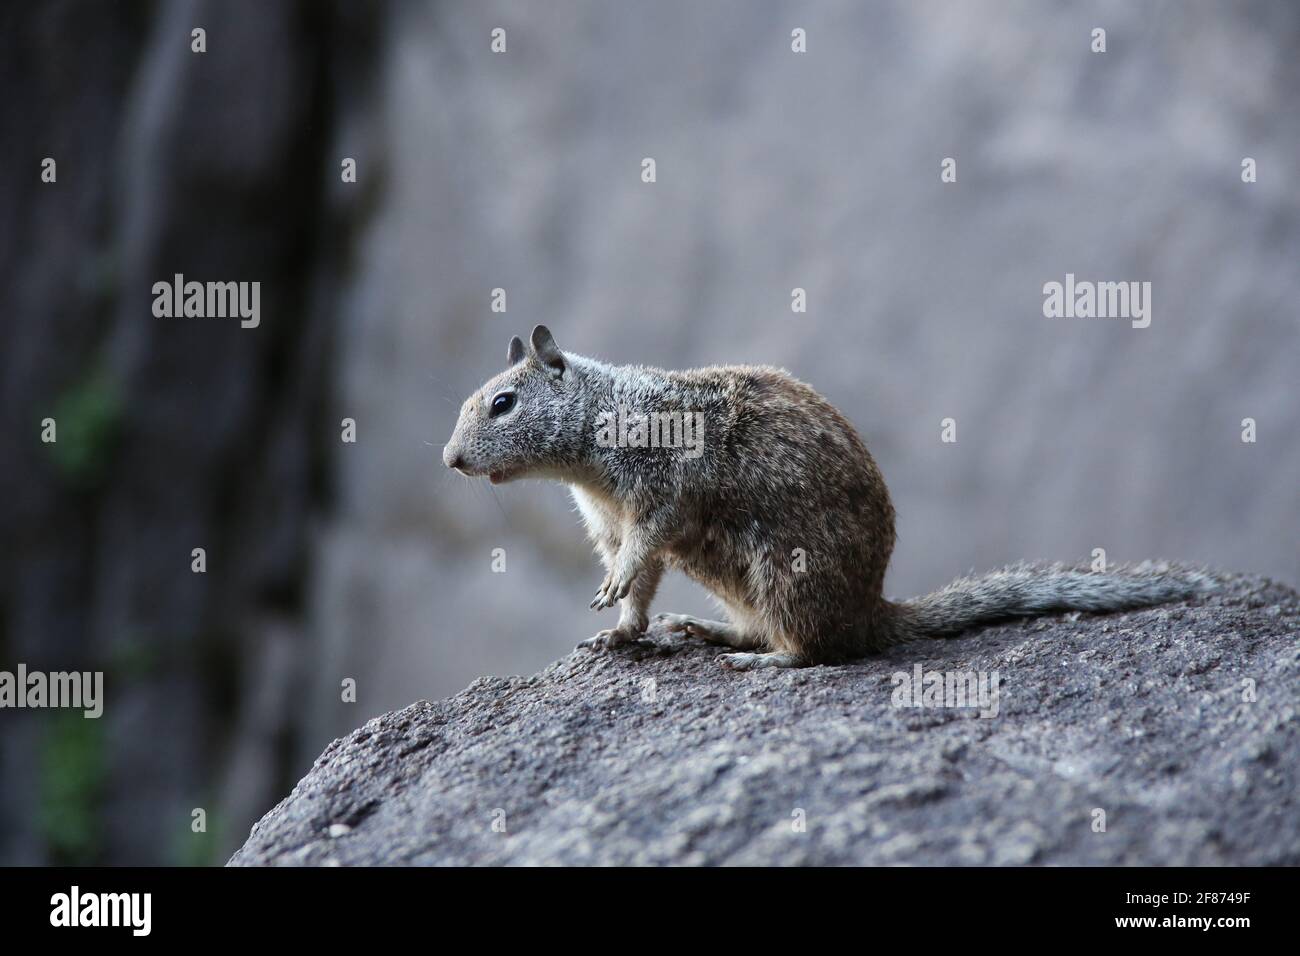 Selective focus shot of a grey squirrel in the Yosemite National Park, in California, USA Stock Photo